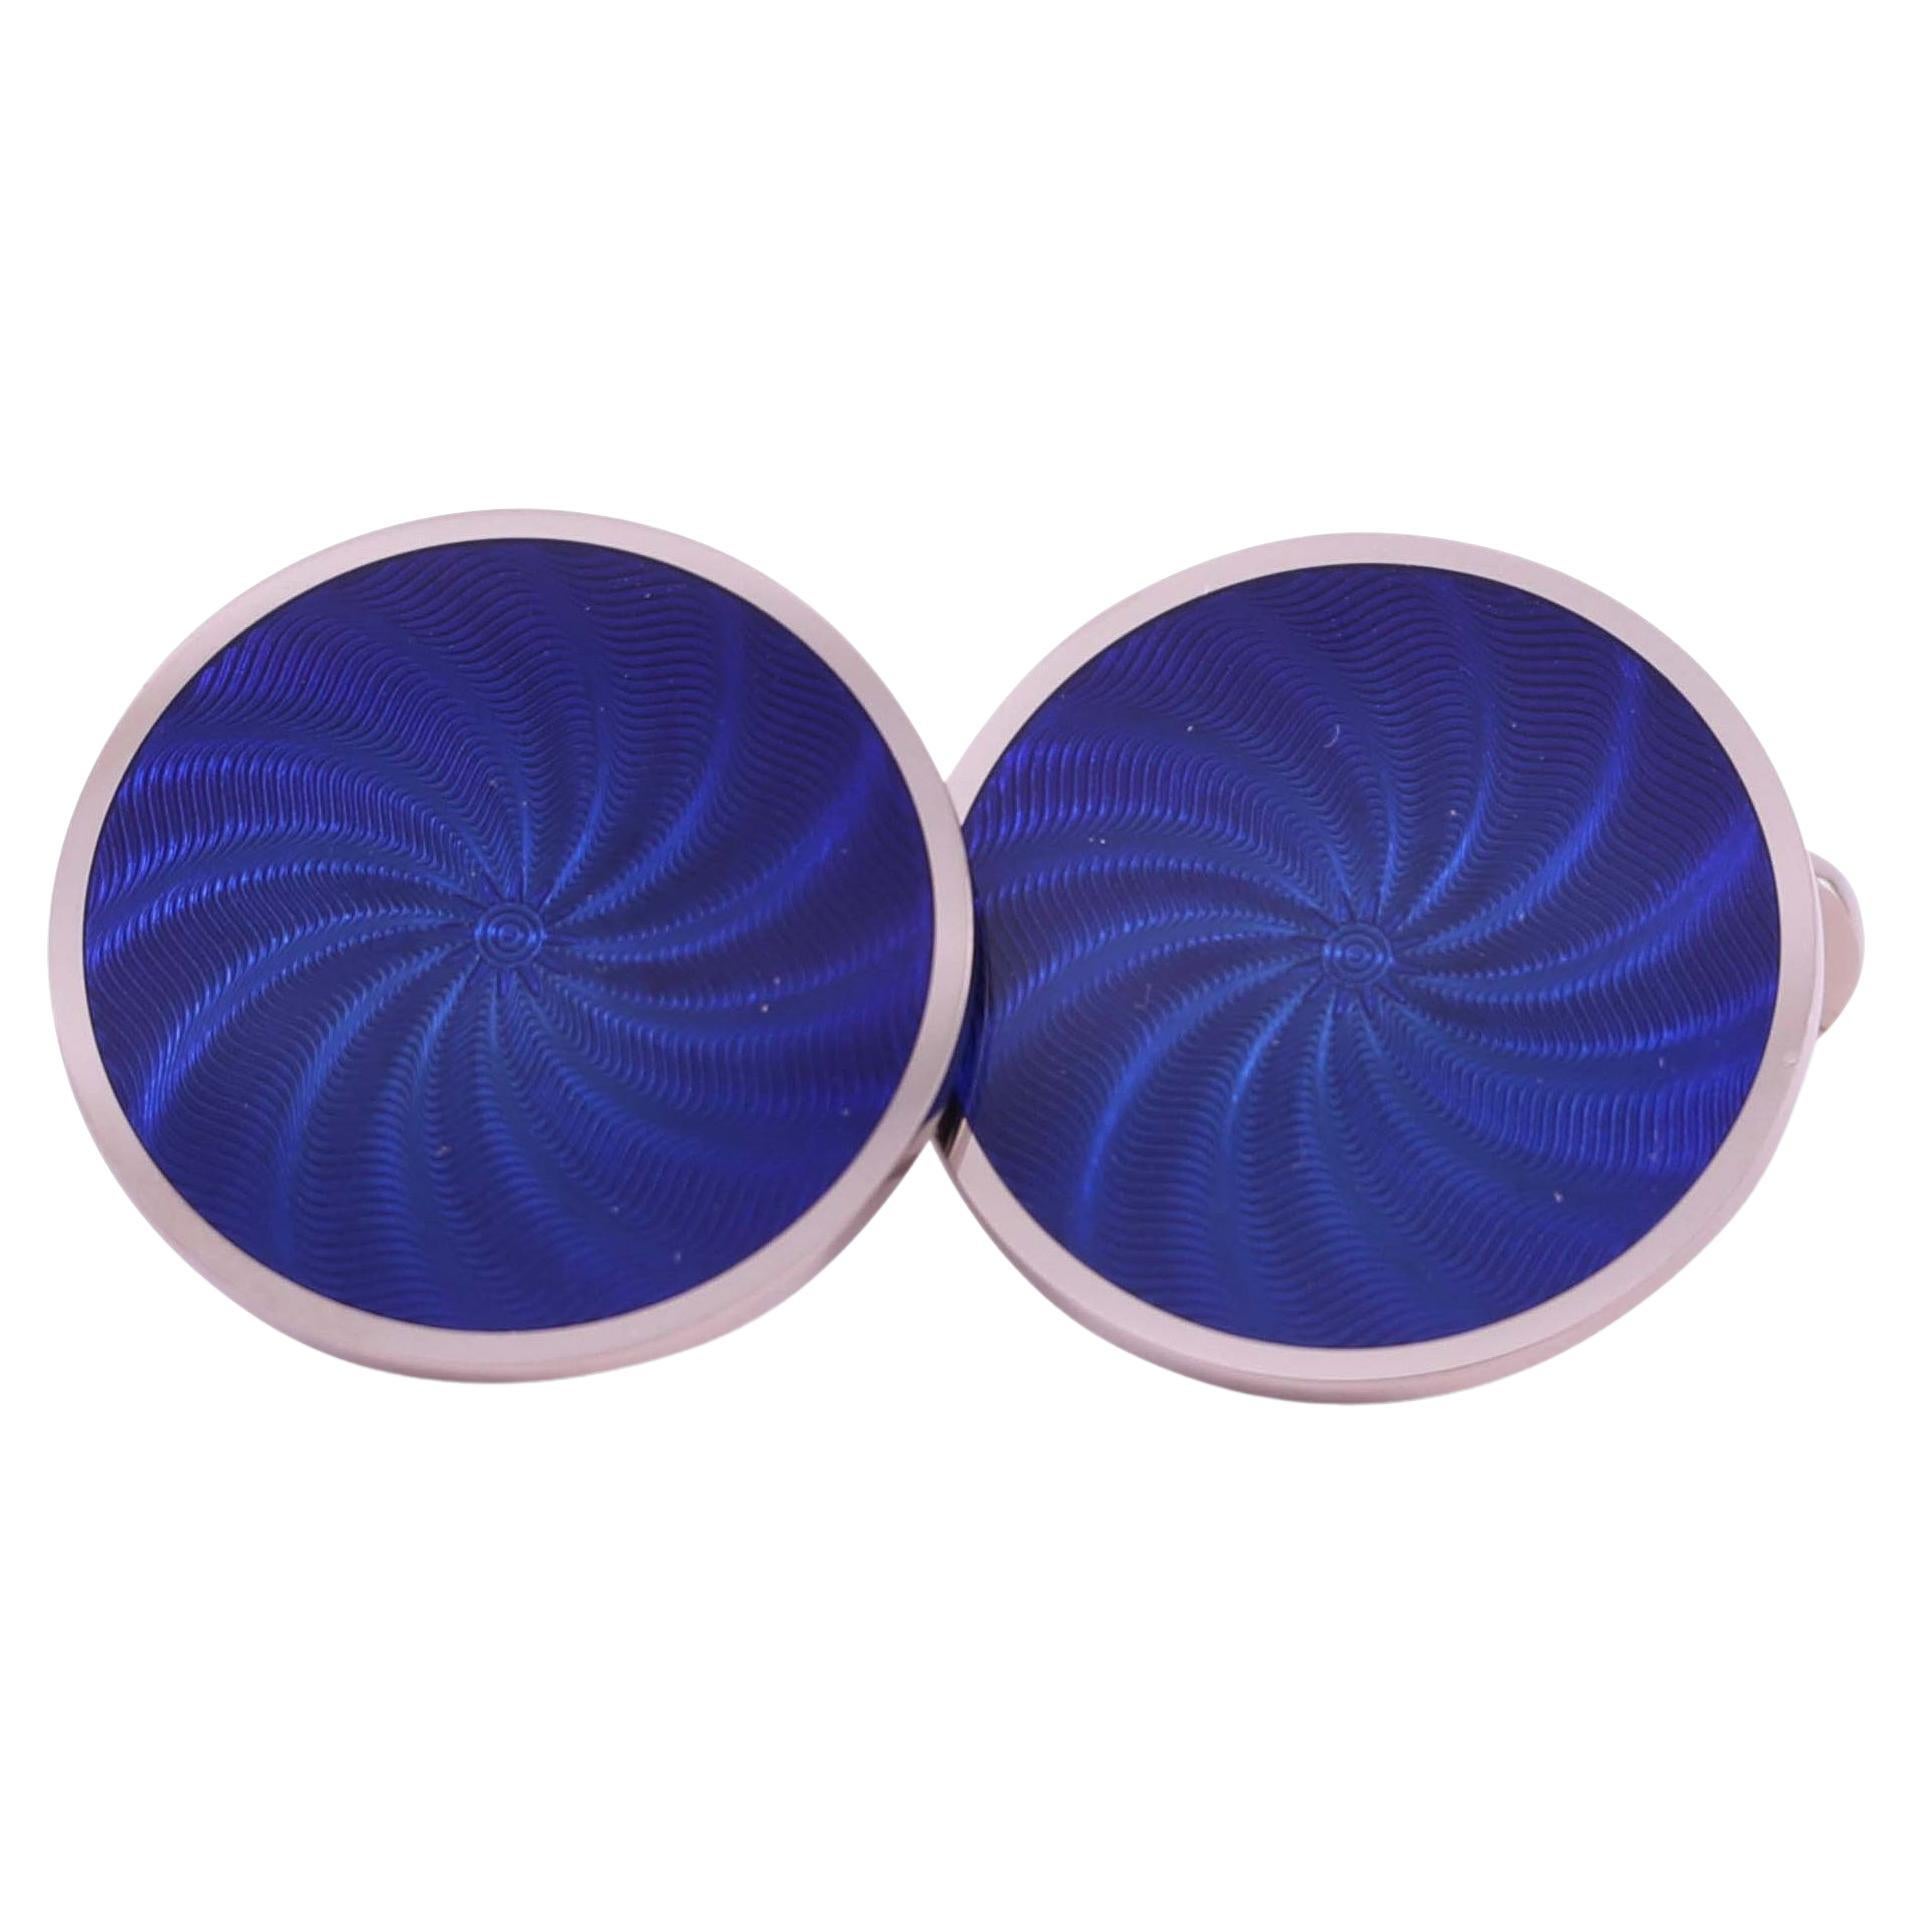 Victor Mayer Round Cufflinks, Globetrotter Collection, 18k White Gold, Navy Blue Vitreous Enamel, Guilloche, Diameter 20.0 mm

About the creator Victor Mayer
Victor Mayer is internationally renowned for elegant timeless designs and unrivalled